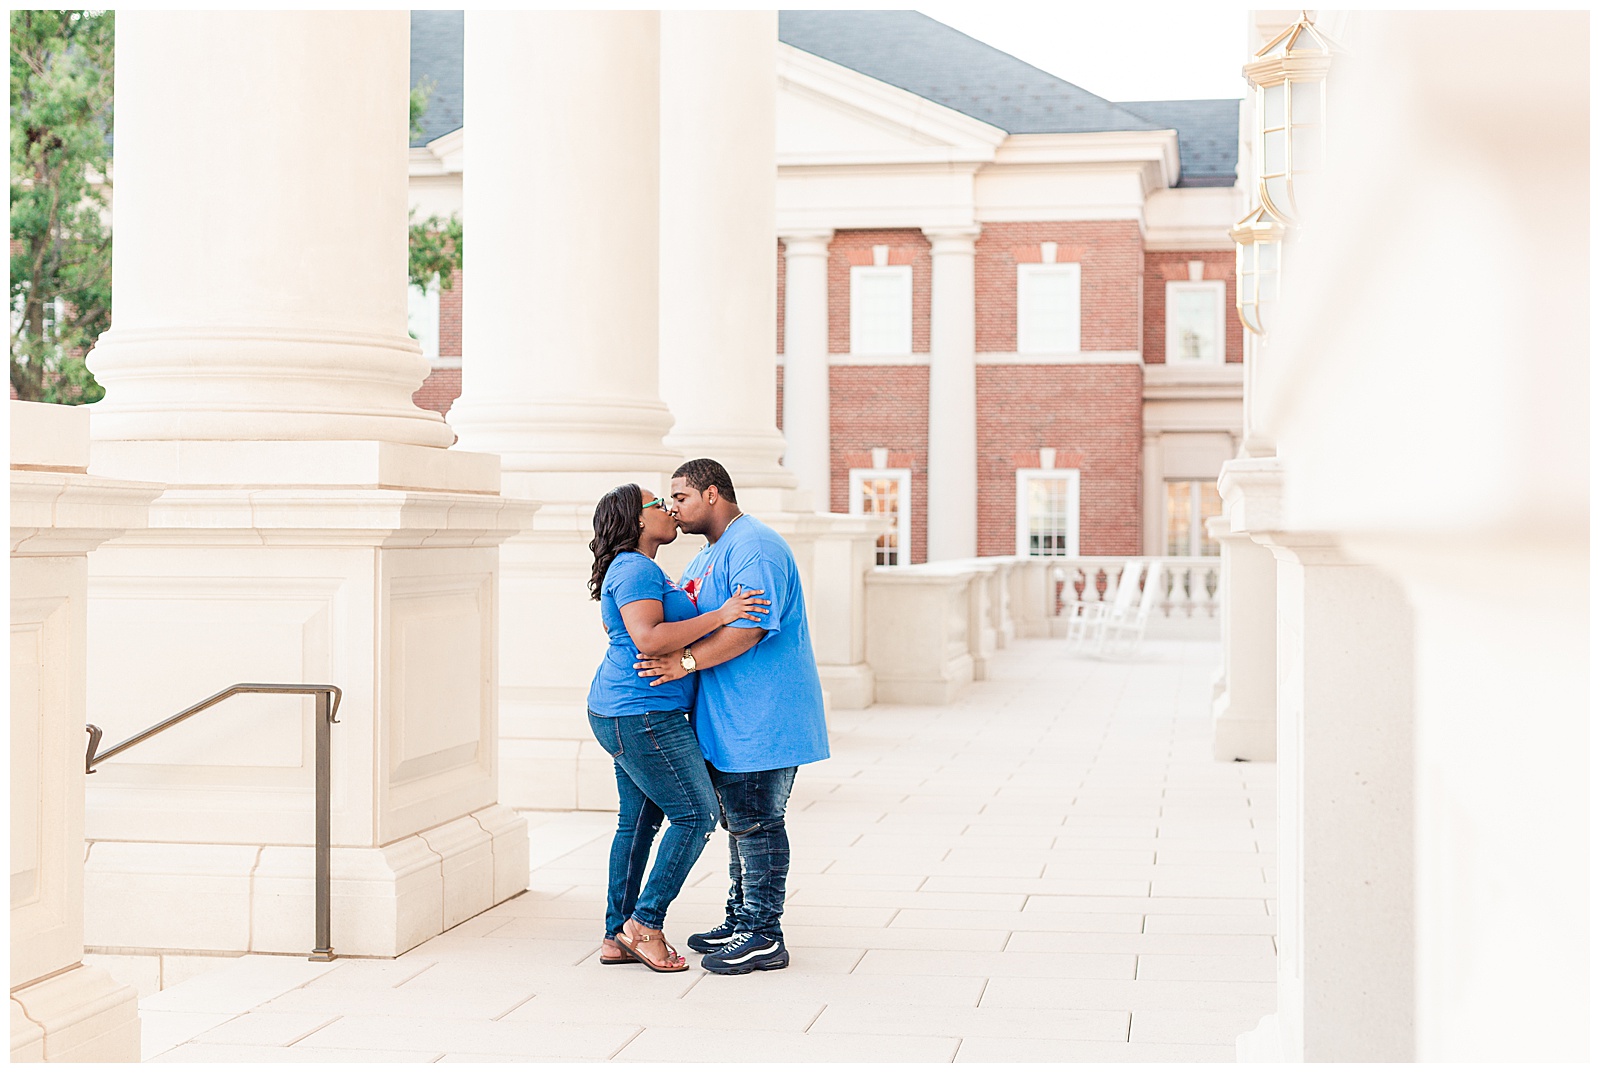 cnu-summer-engagement-session-charneice-kevin-27.jpg